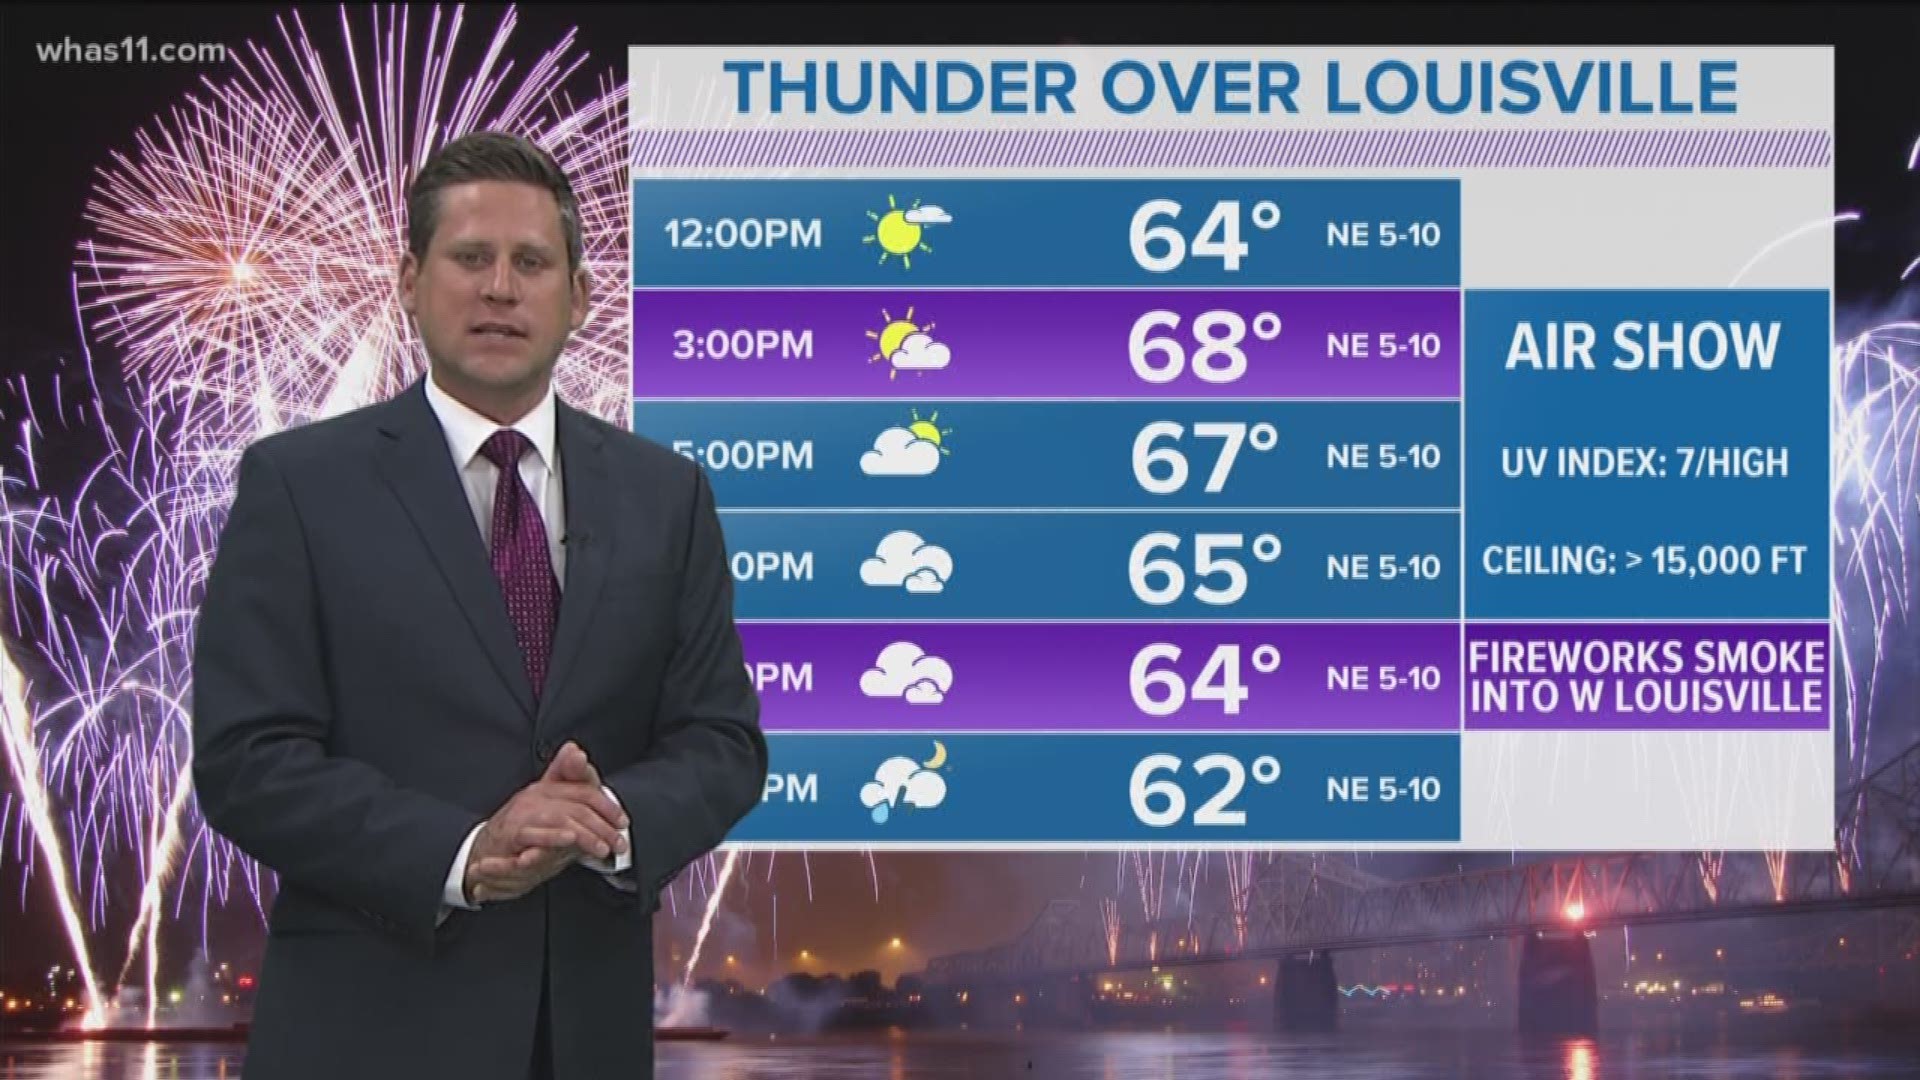 First look at Thunder Over Louisville weather | www.semadata.org